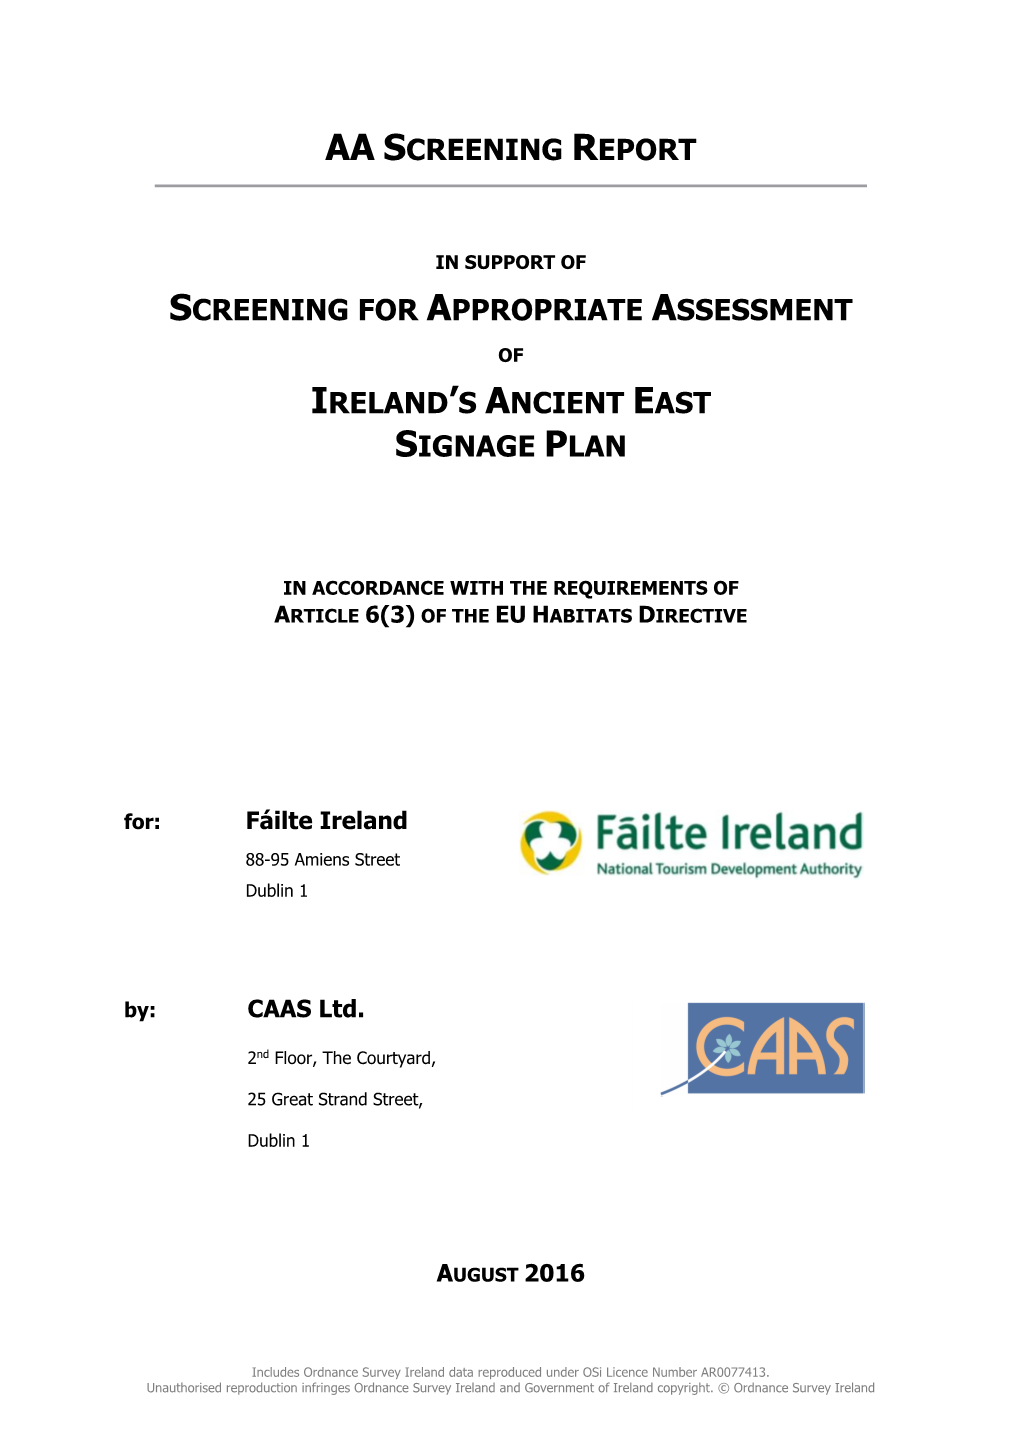 Screening for Appropriate Assessment of Ireland's Ancient East Signage